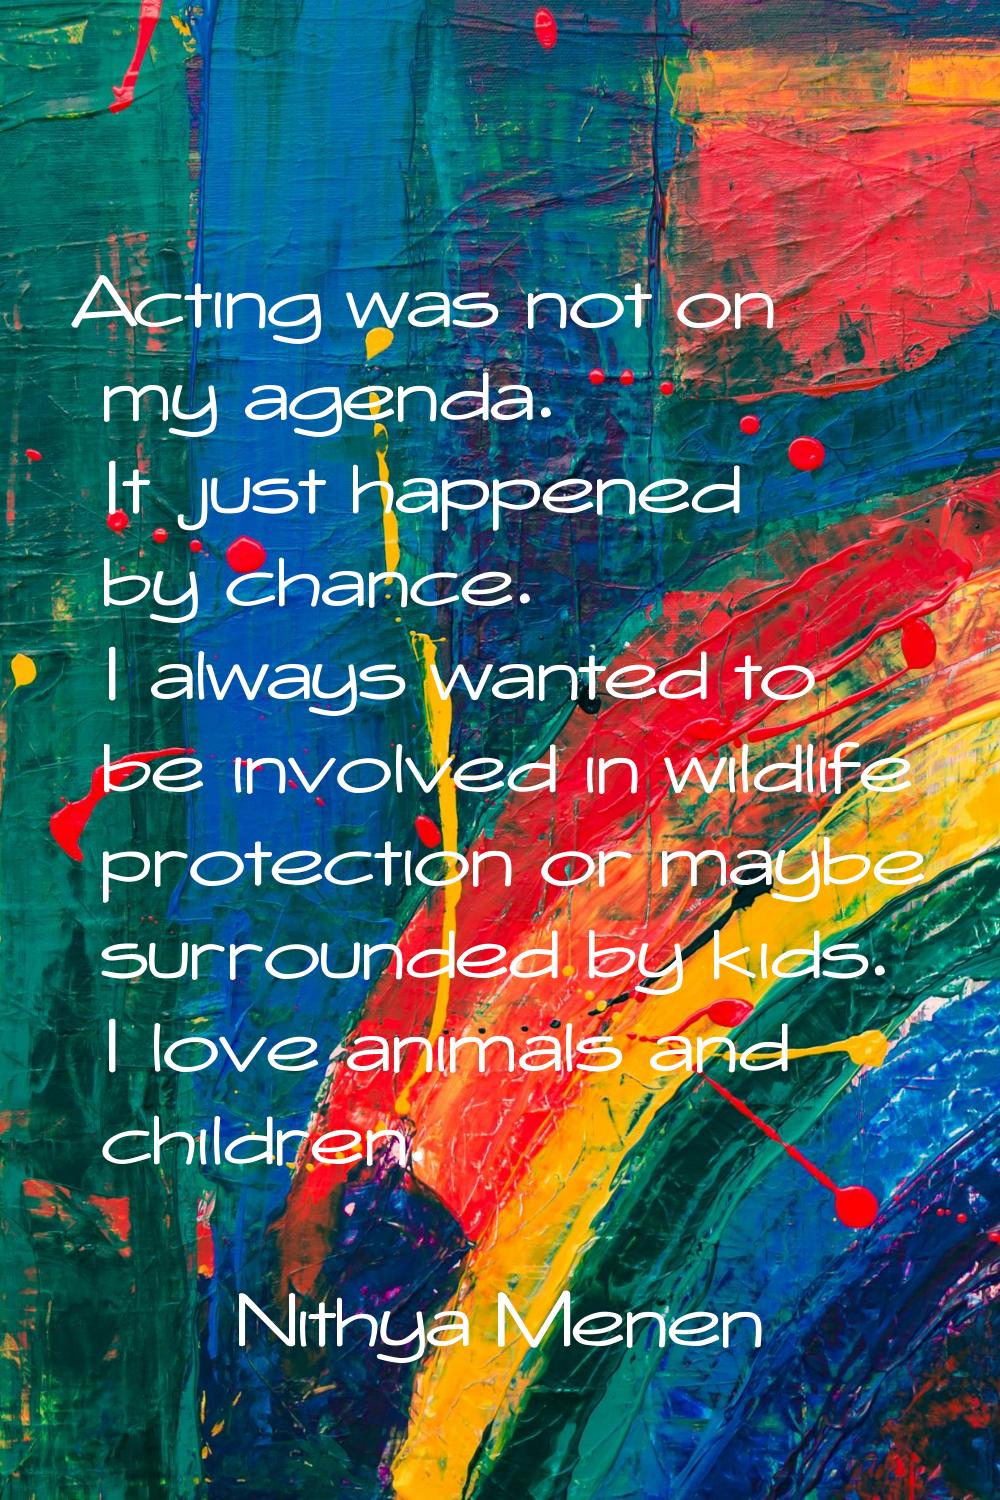 Acting was not on my agenda. It just happened by chance. I always wanted to be involved in wildlife